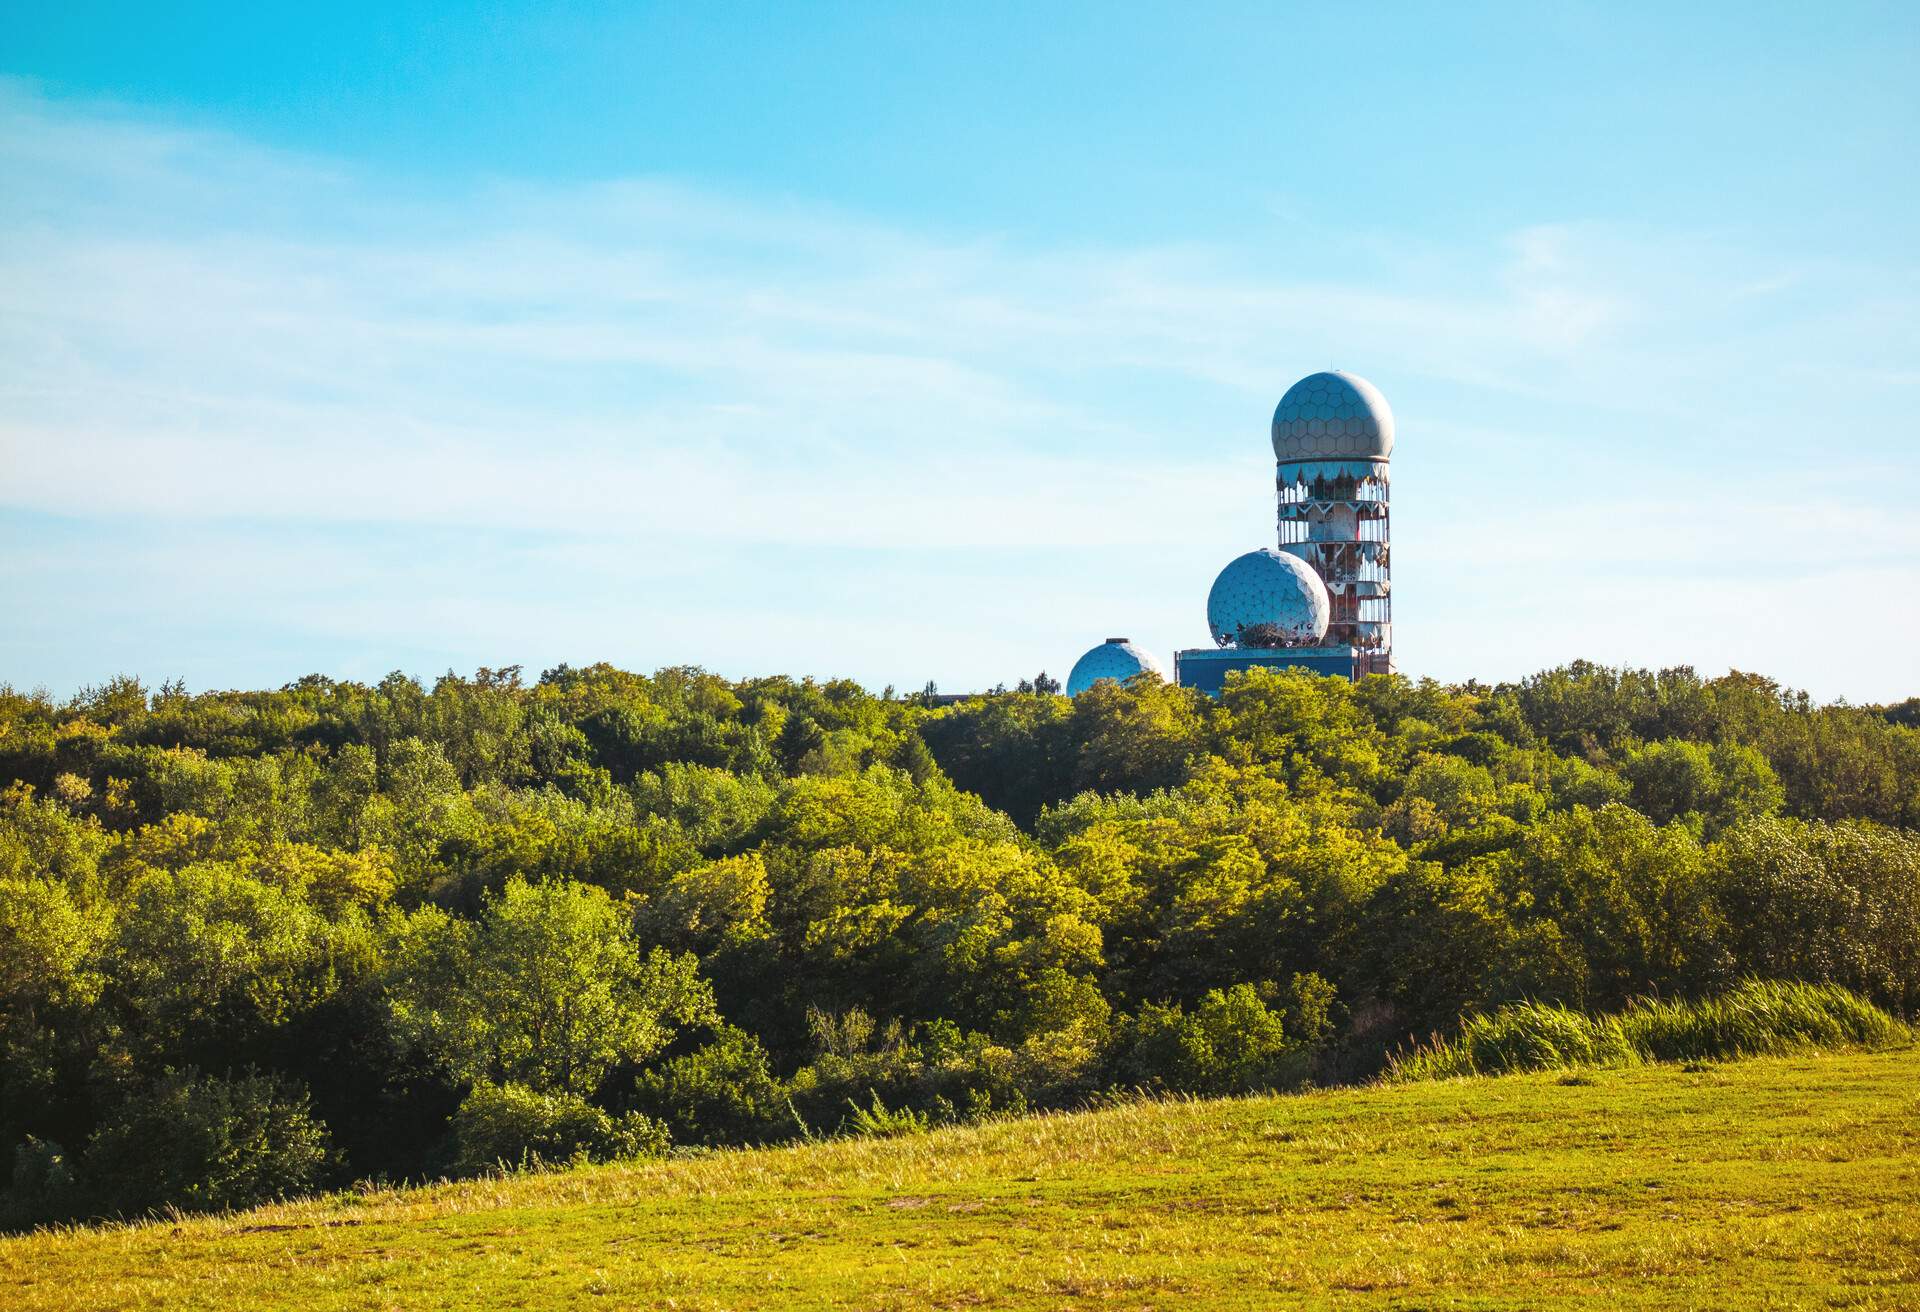 Derelict radomes in the lush forest mountain against the blue sky.